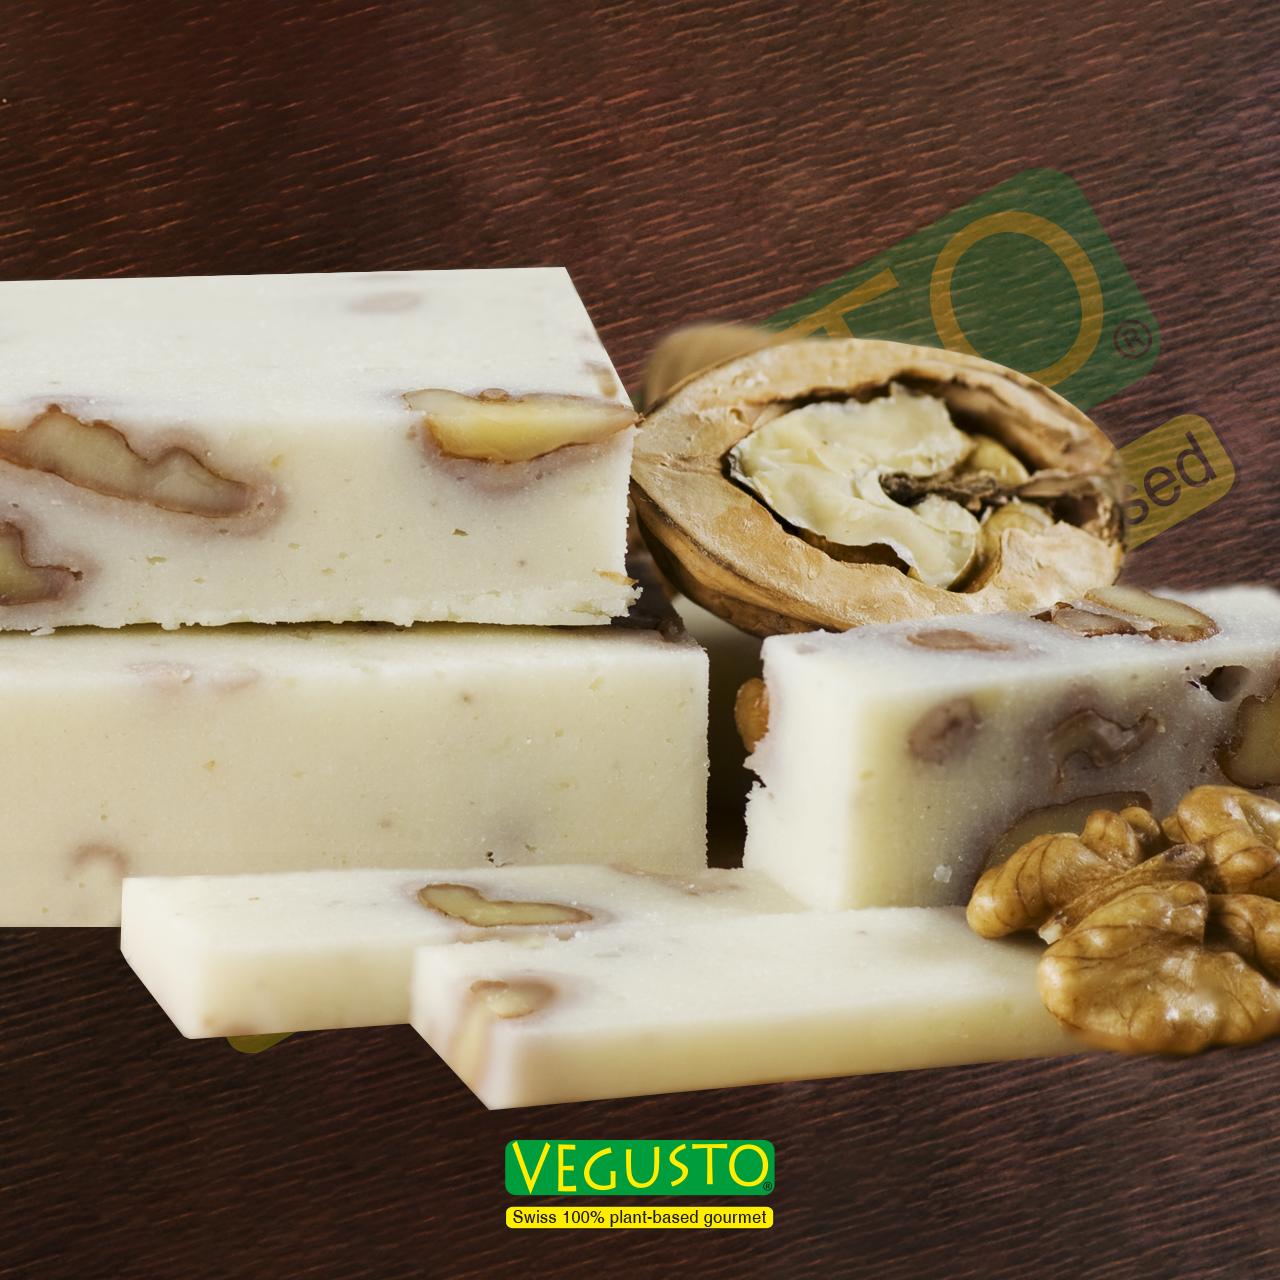 No-Moo, Walnut Vegan, non-dairy alternative to cheese with walnuts and with a mild-aromatic, nutty flavour.